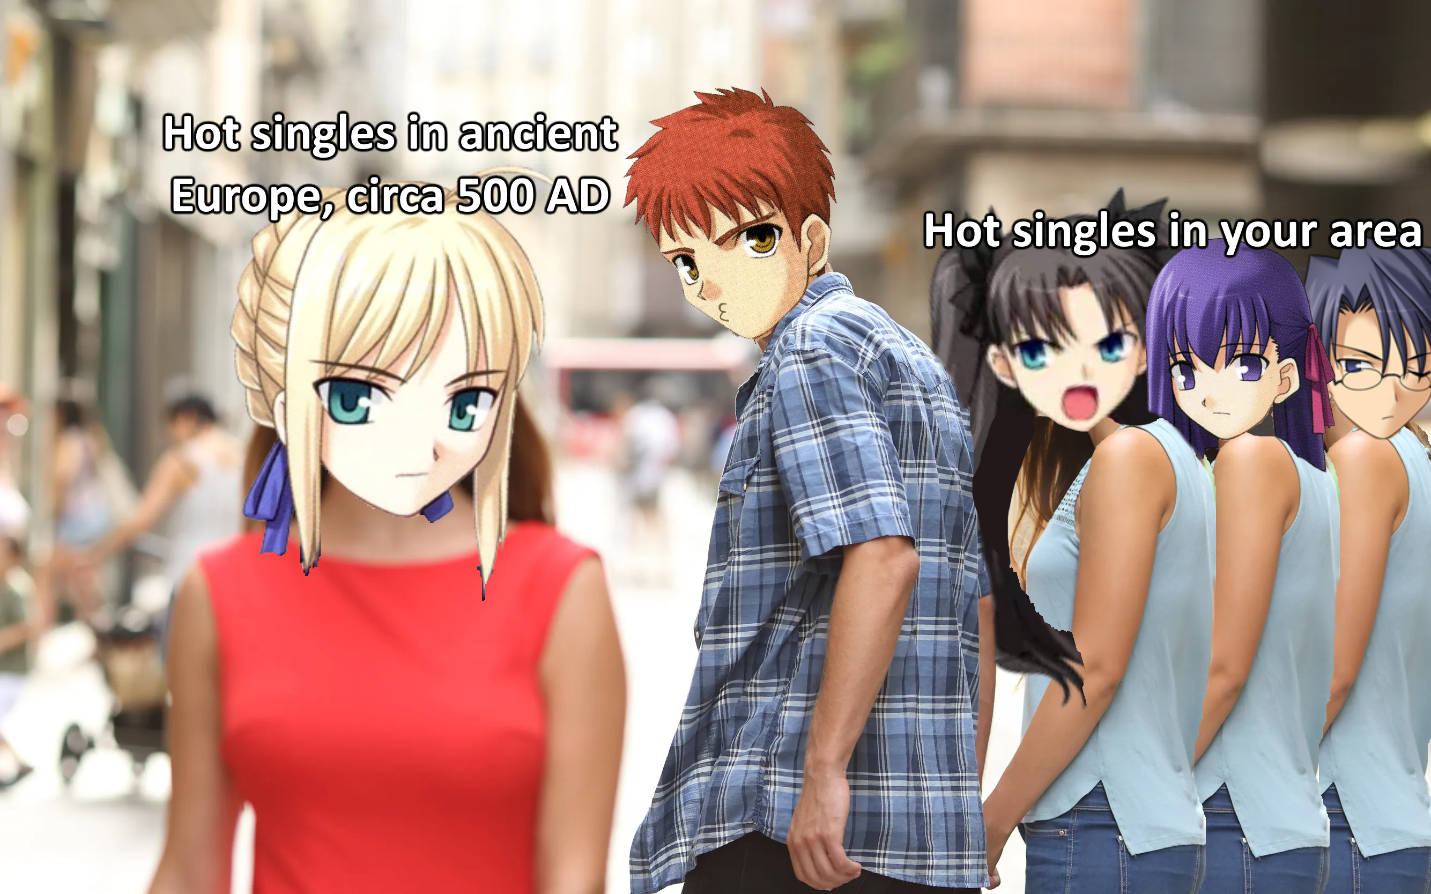 Saber route in a nutshell